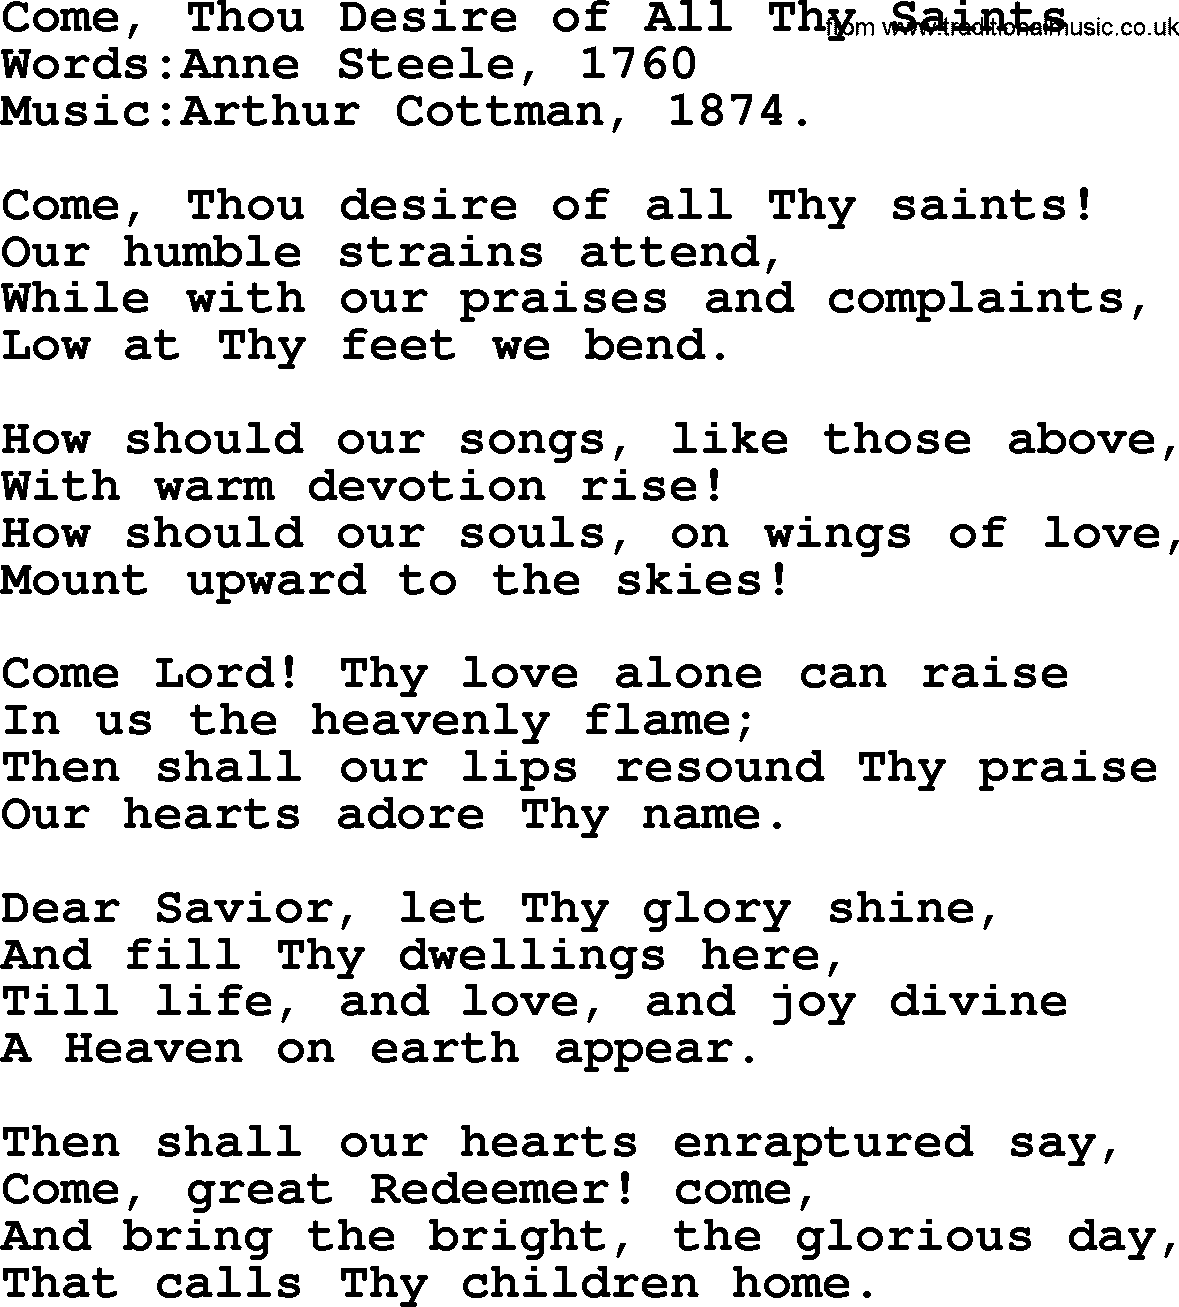 Christian hymns and songs about Jesus' Return(The Second Coming): Come, Thou Desire Of All Thy Saints, lyrics with PDF